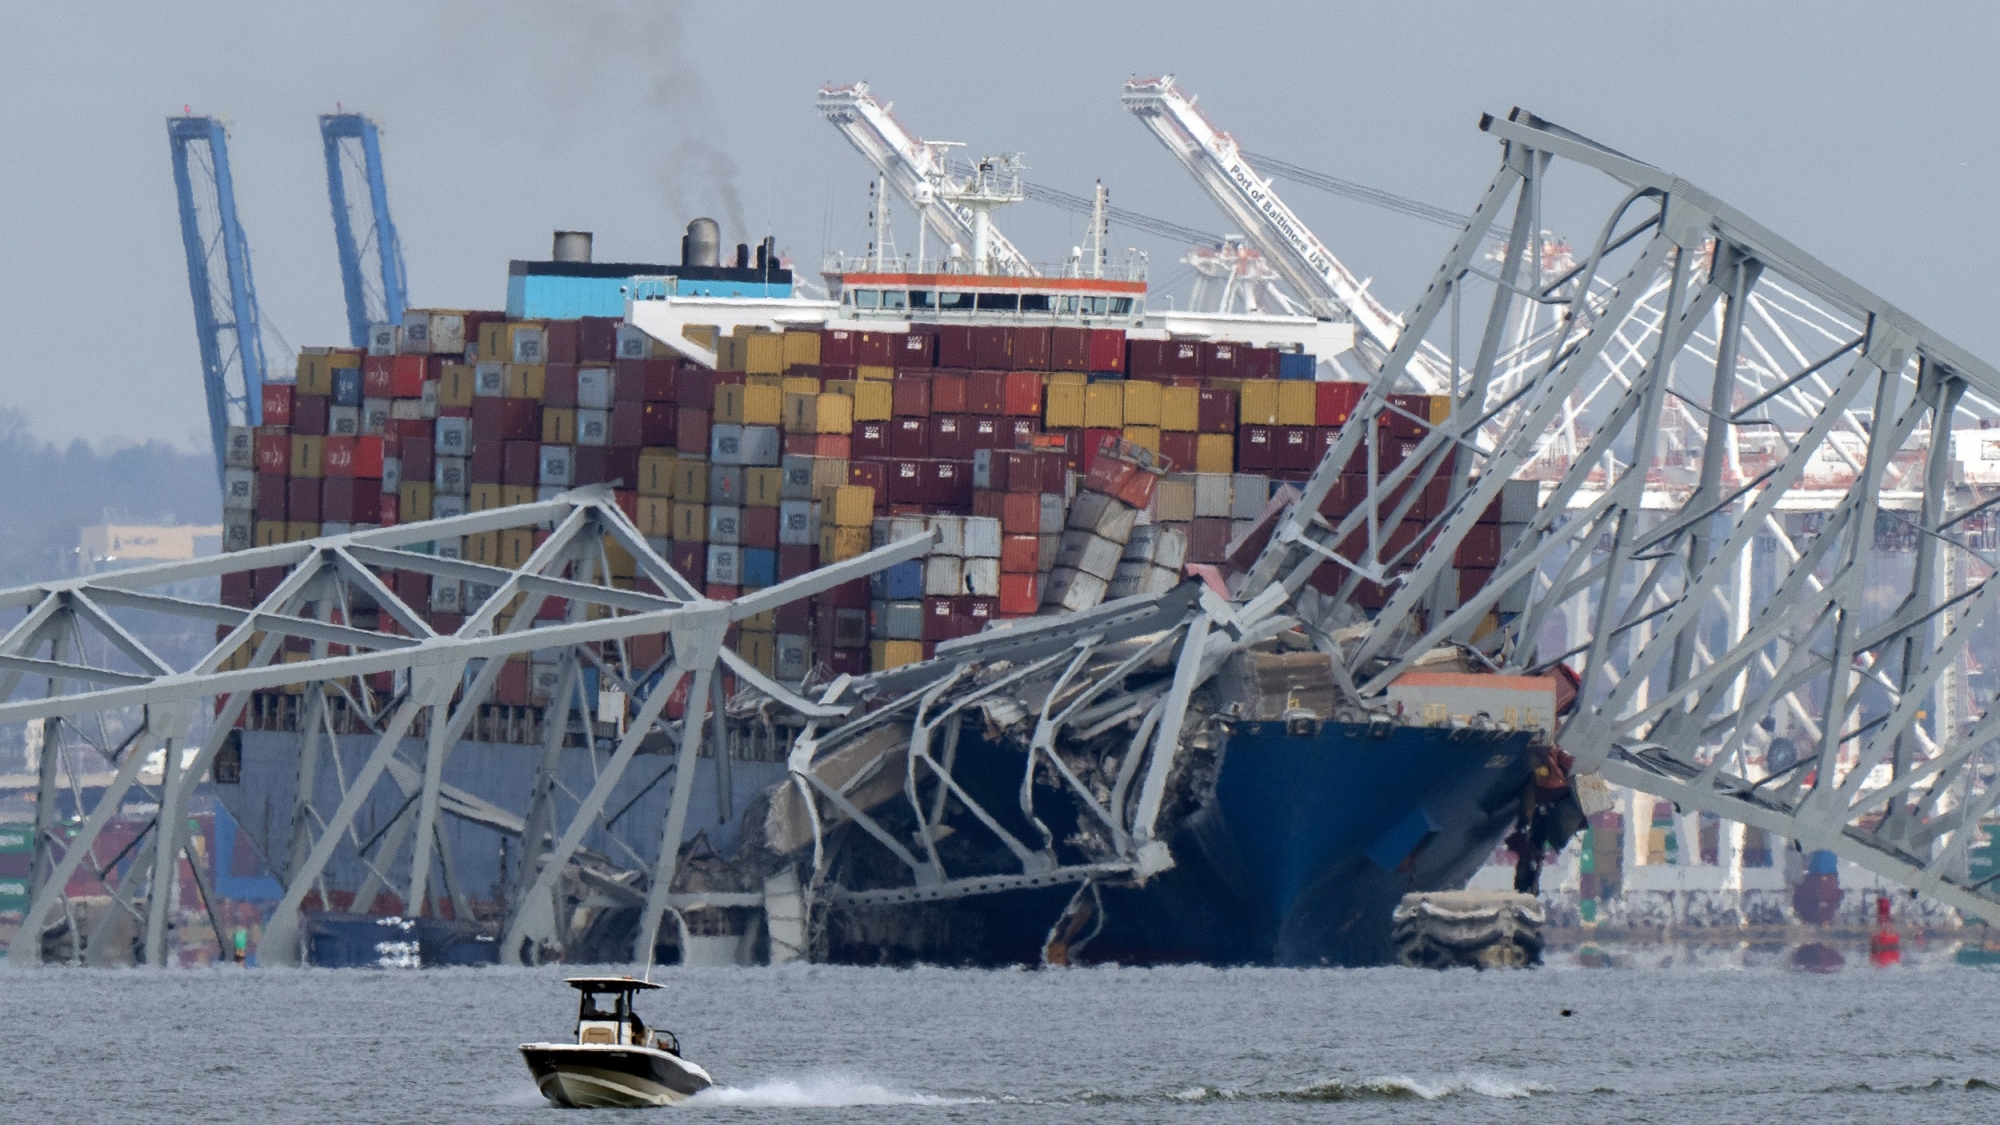 A boat moves past a container ship as it rests against wreckage of the Francis Scott Key Bridge on Tuesday, March 26, 2024, as seen from Pasadena, Md. The container ship lost power and rammed into the major bridge in Baltimore early Tuesday, causing it to snap and plunge into the river below. Several vehicles fell into the chilly waters, and rescuers searched for survivors. (AP Photo/Mark Schiefelbein)